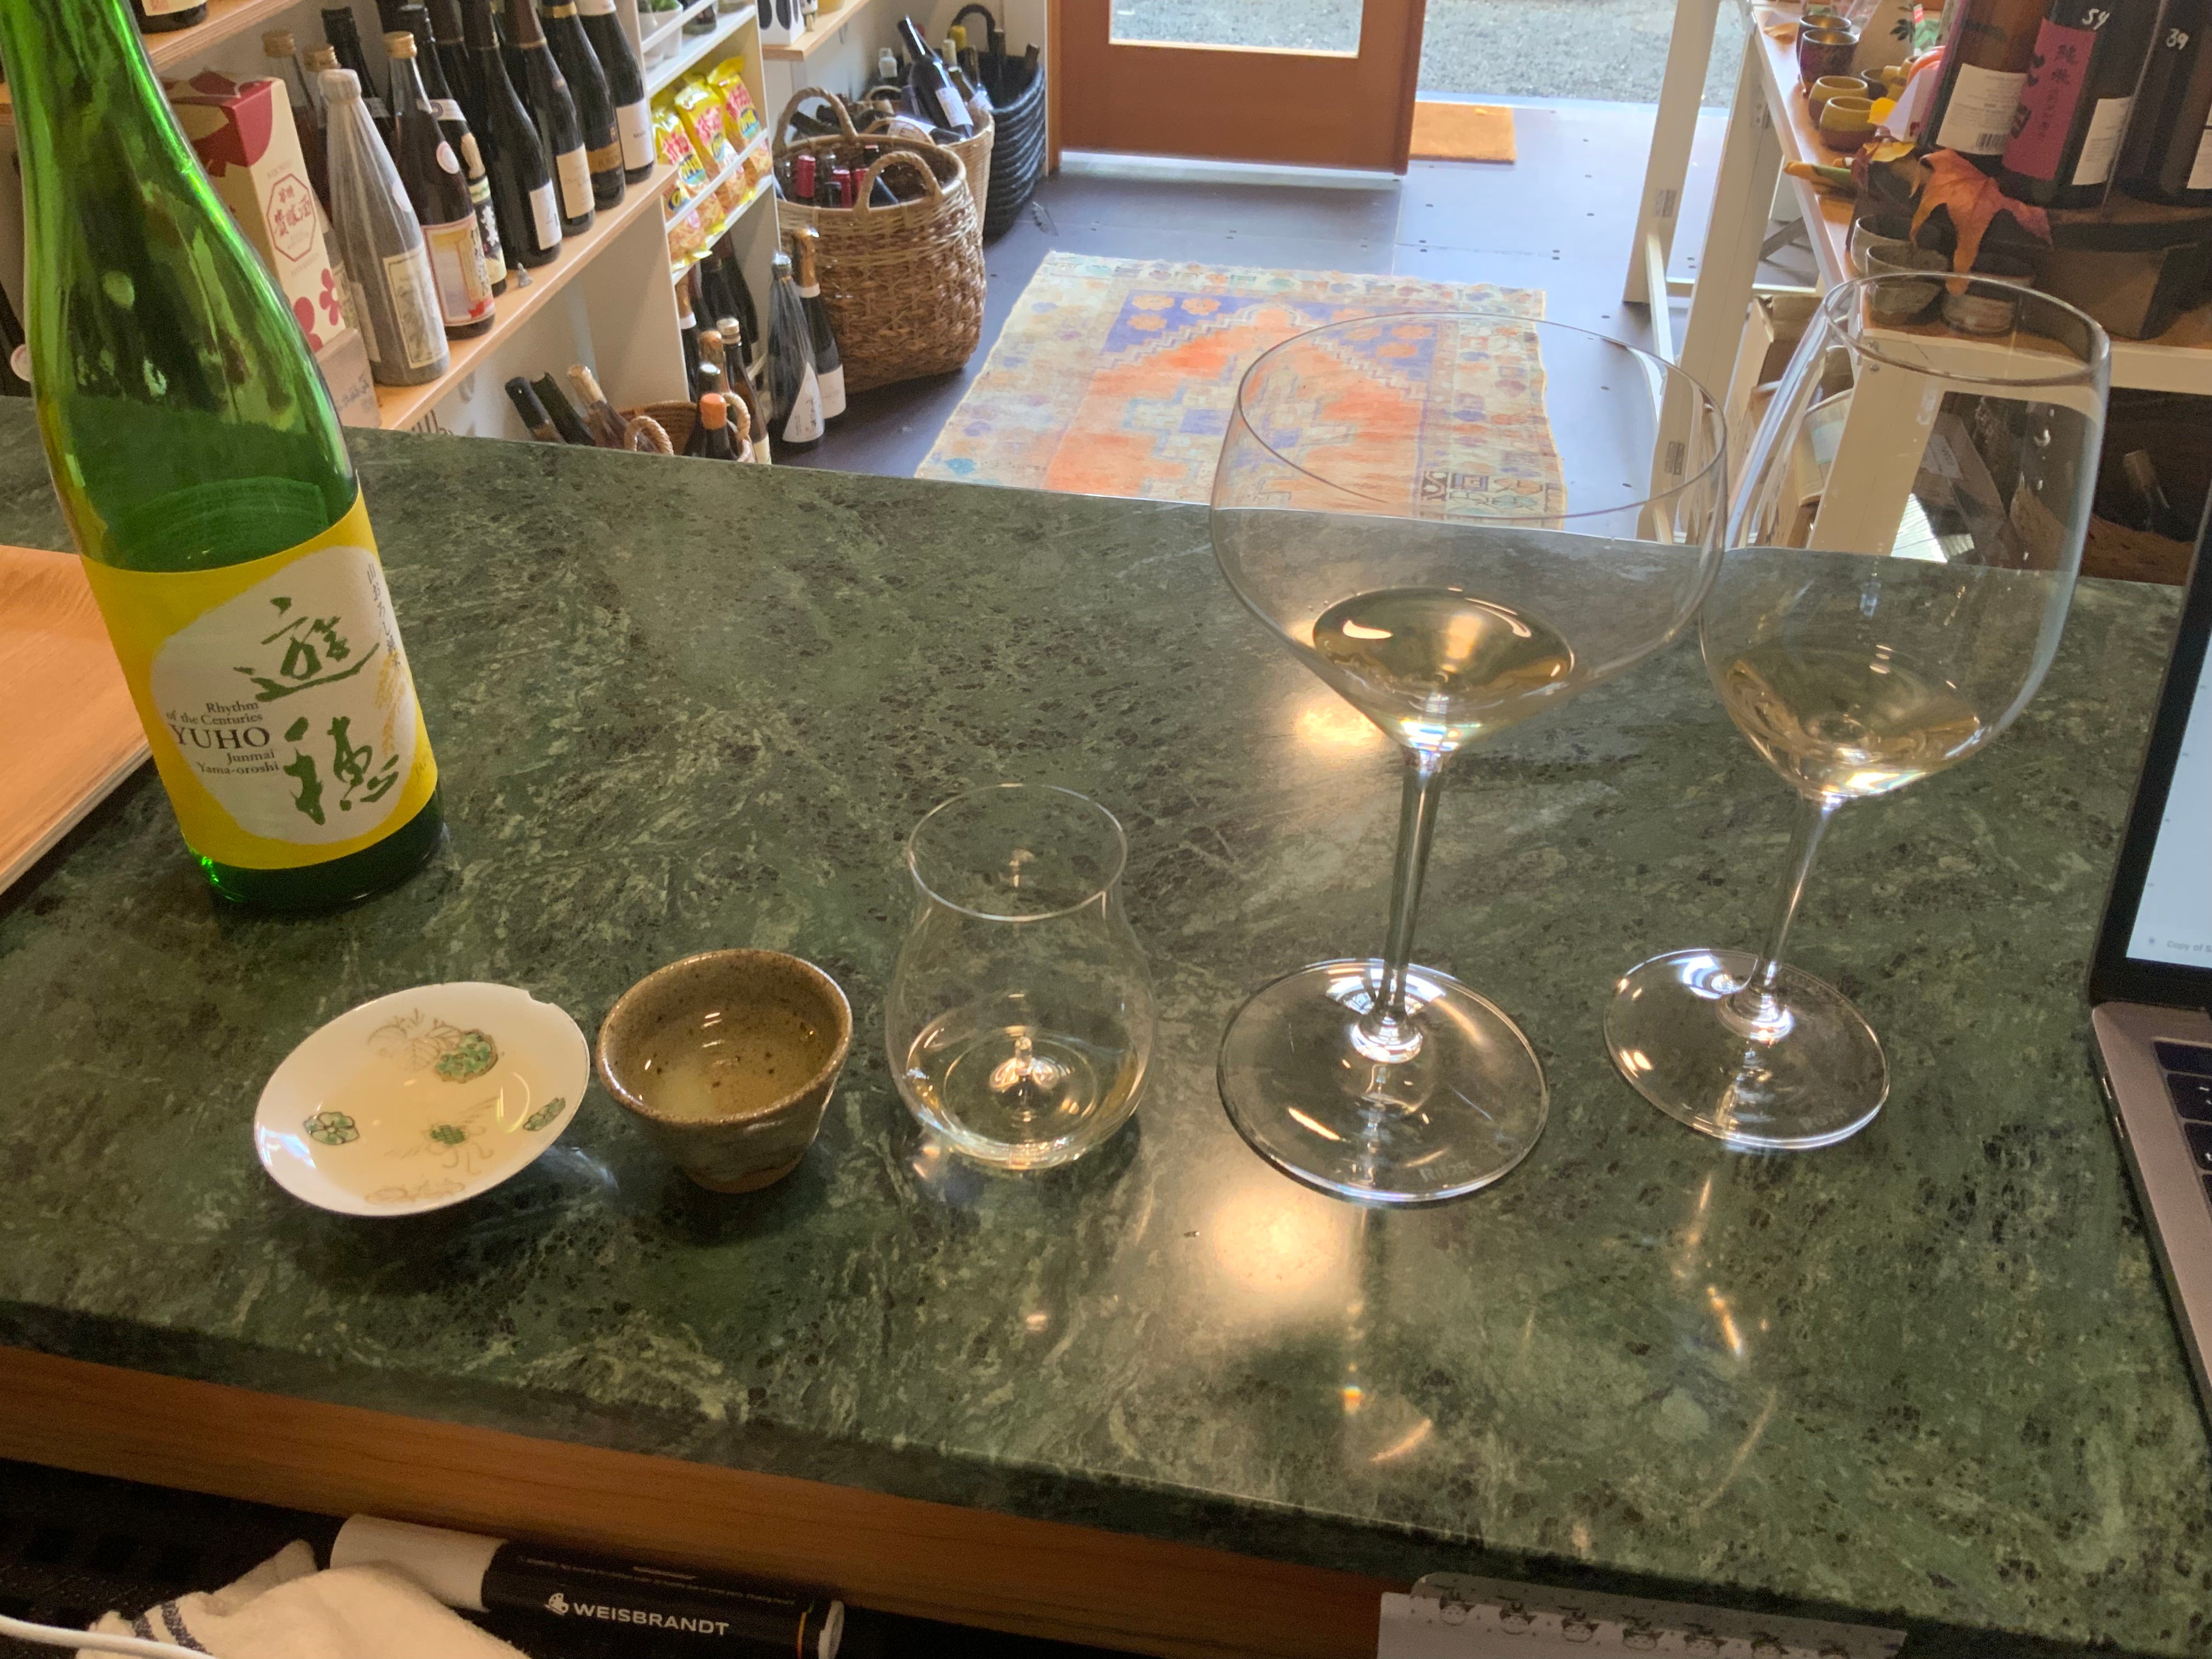 A lineup of 5 sake cups and glasses for comparison